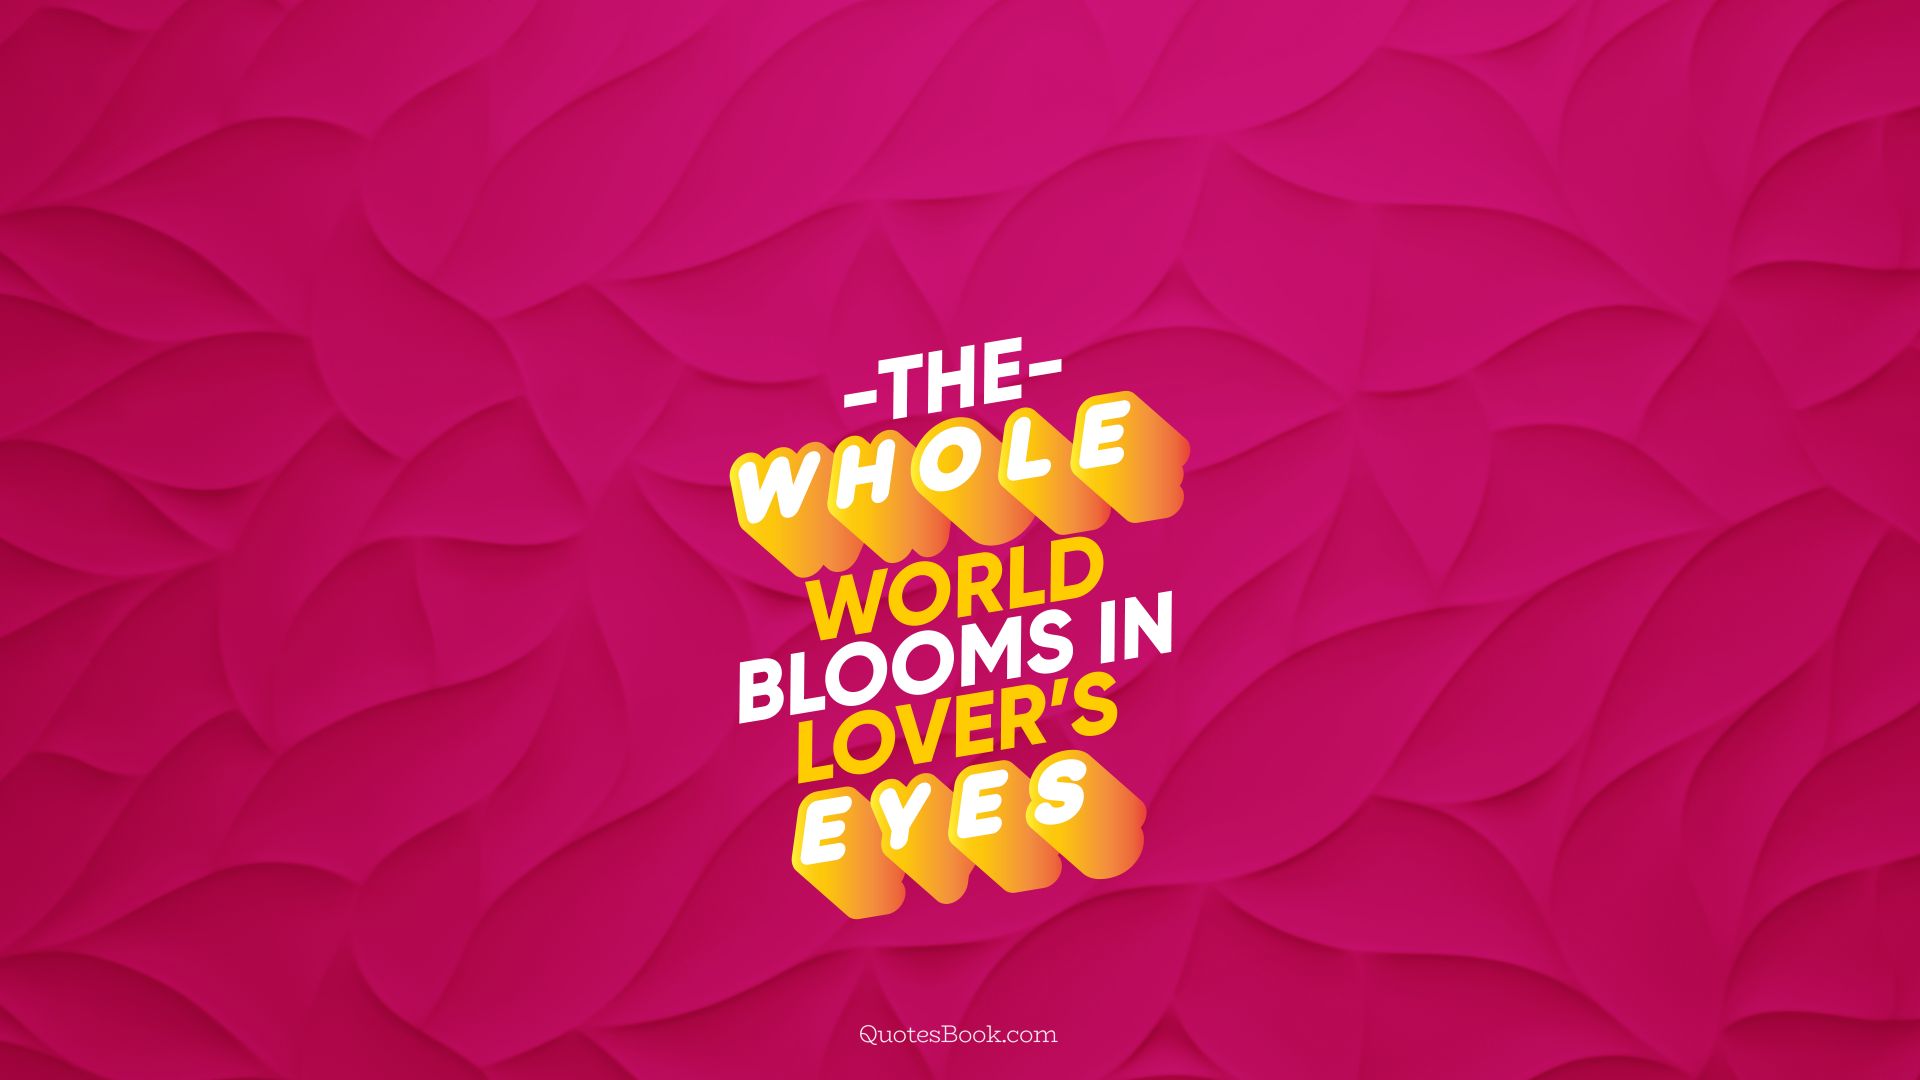 The whole world blooms in lover’s eyes. - Quote by QuotesBook